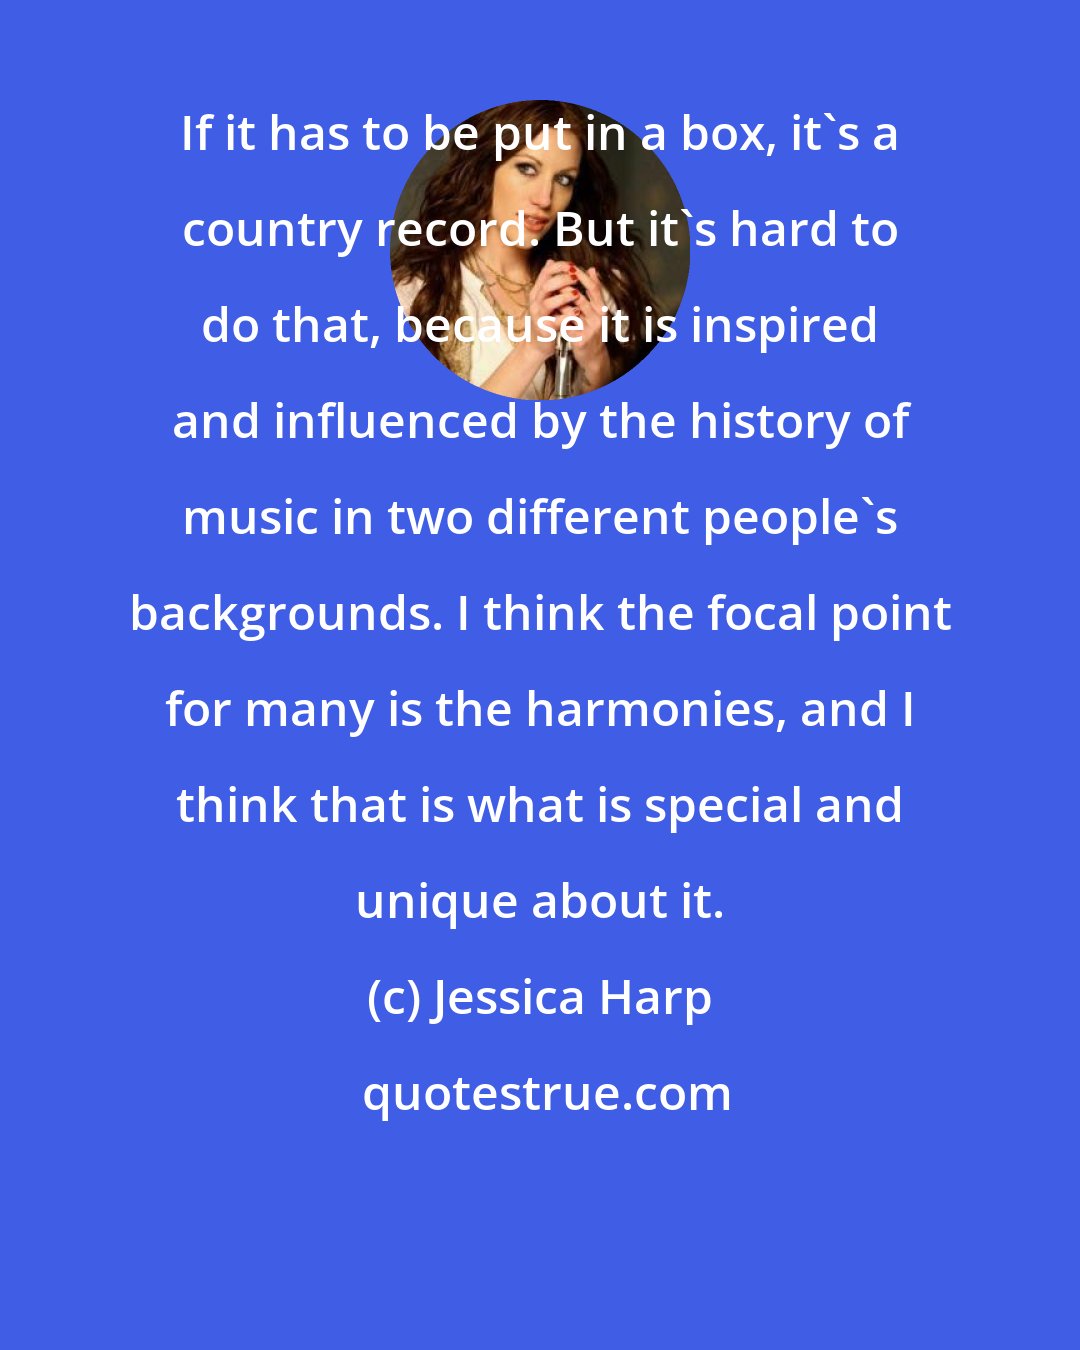 Jessica Harp: If it has to be put in a box, it's a country record. But it's hard to do that, because it is inspired and influenced by the history of music in two different people's backgrounds. I think the focal point for many is the harmonies, and I think that is what is special and unique about it.